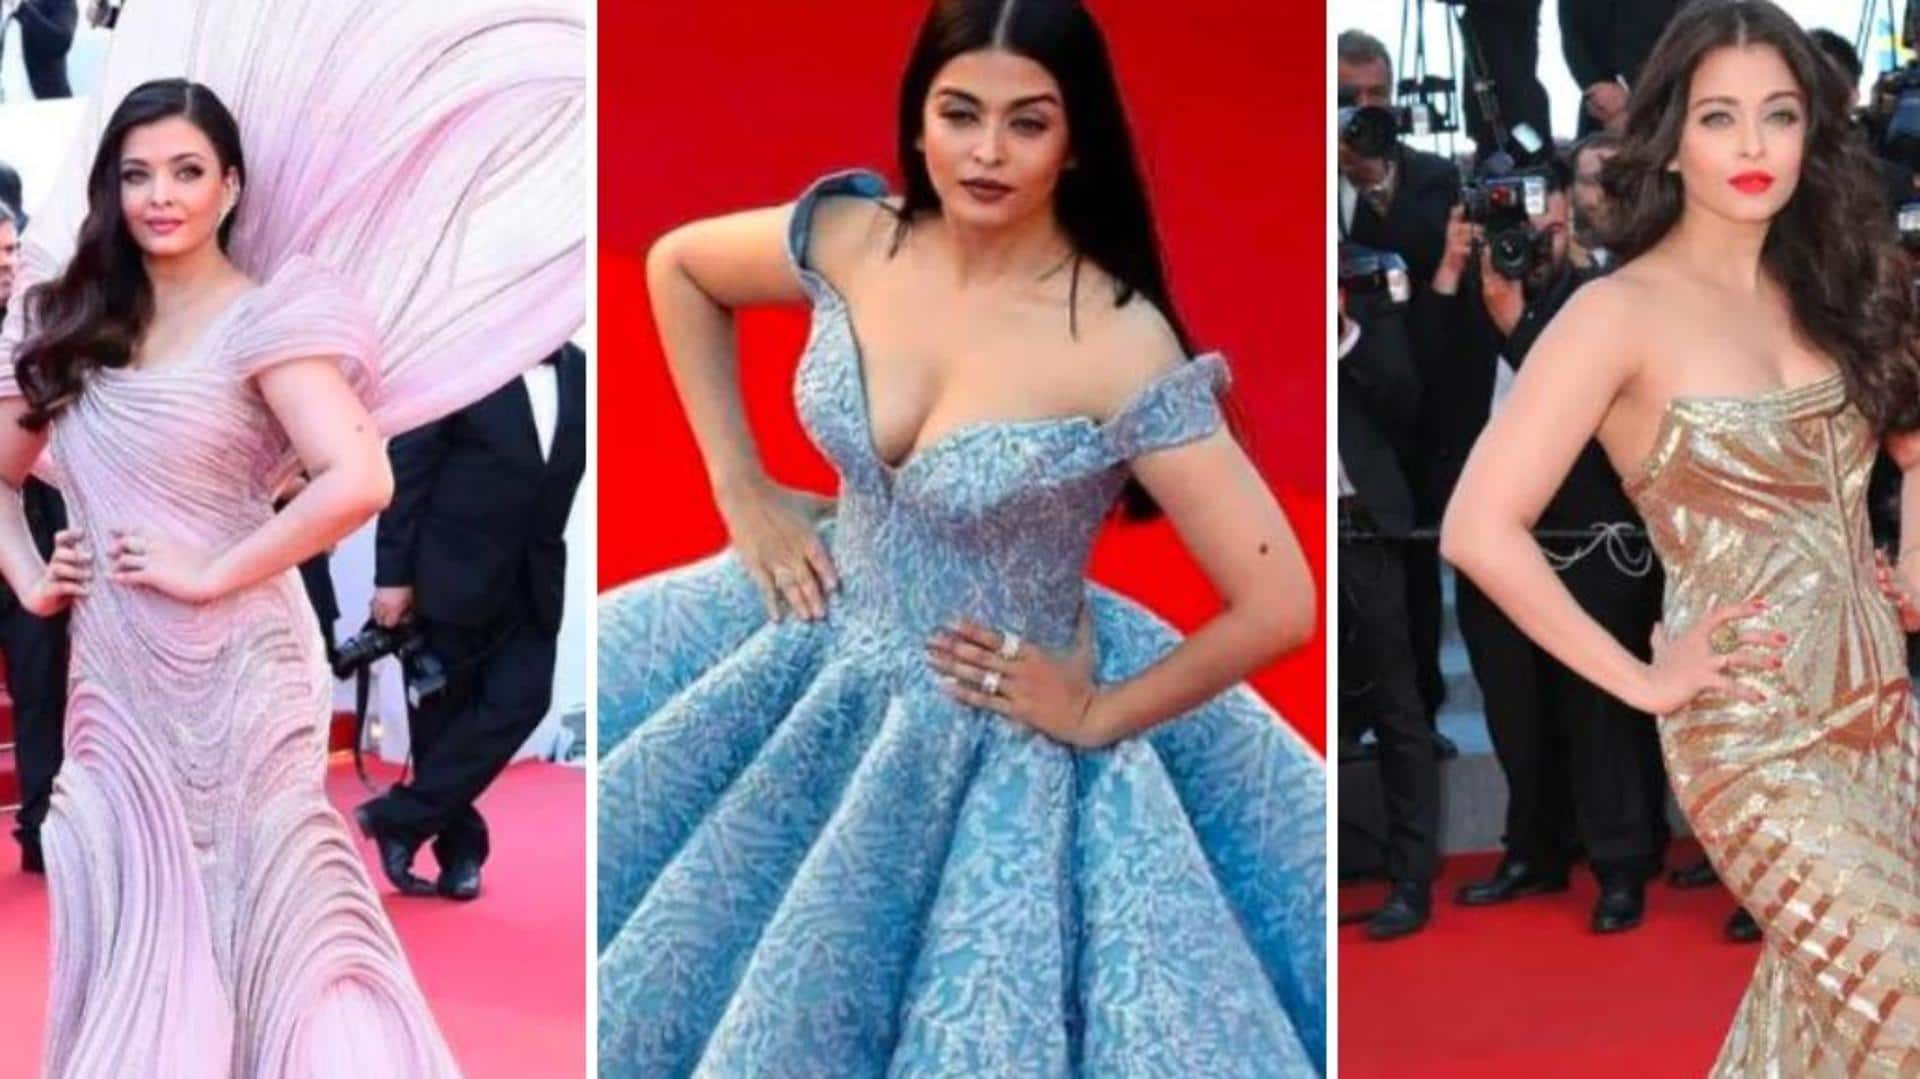 Cannes 2023: Recap of Aishwarya's past looks ahead of appearance